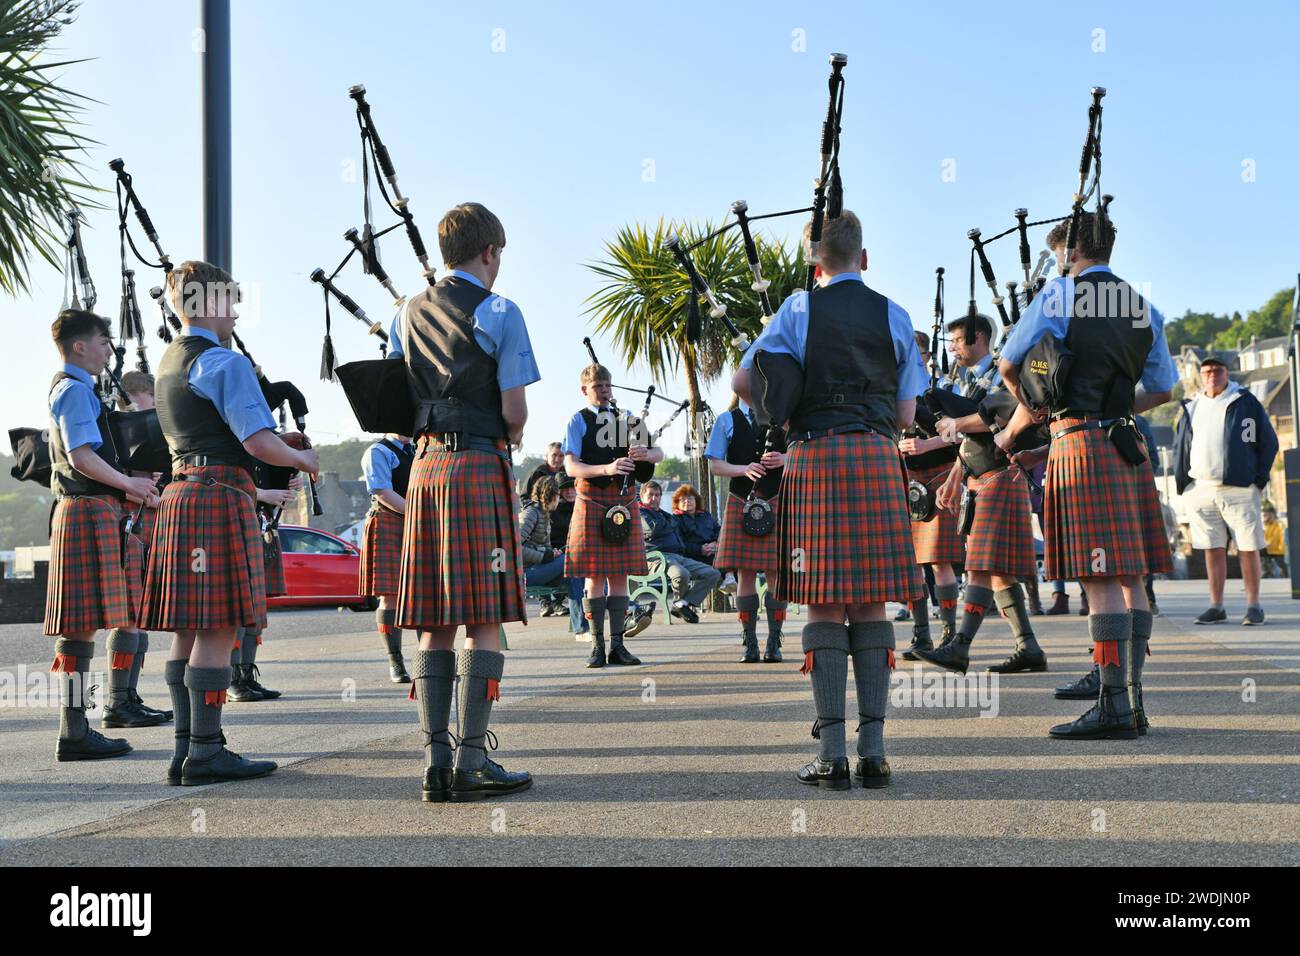 Members of the Oban High School Pipe Band playing in the town centre of Oban Stock Photo